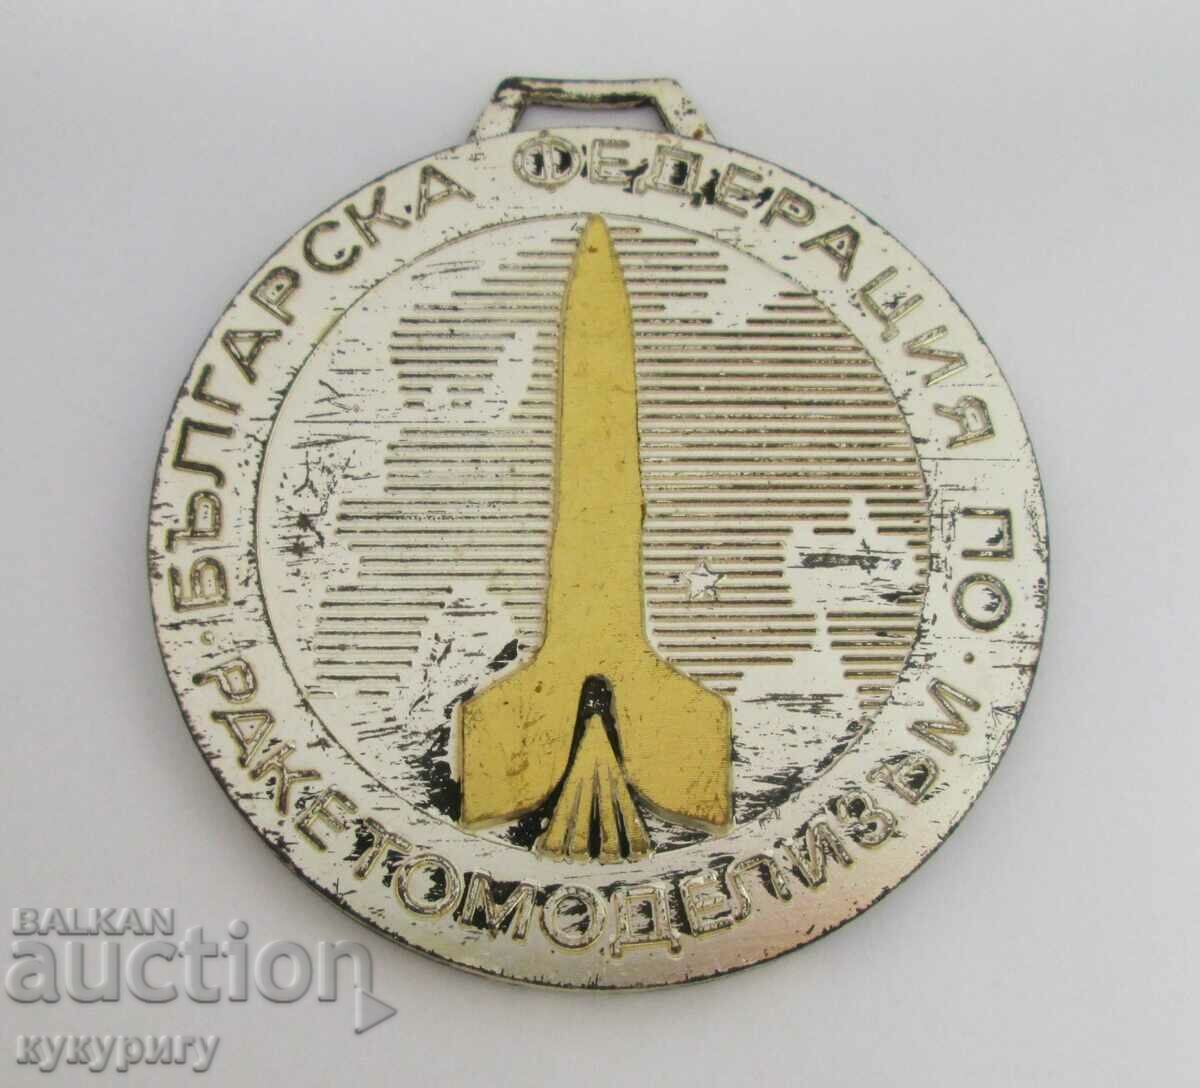 Old medal of the Bulgarian Model Rocket Federation